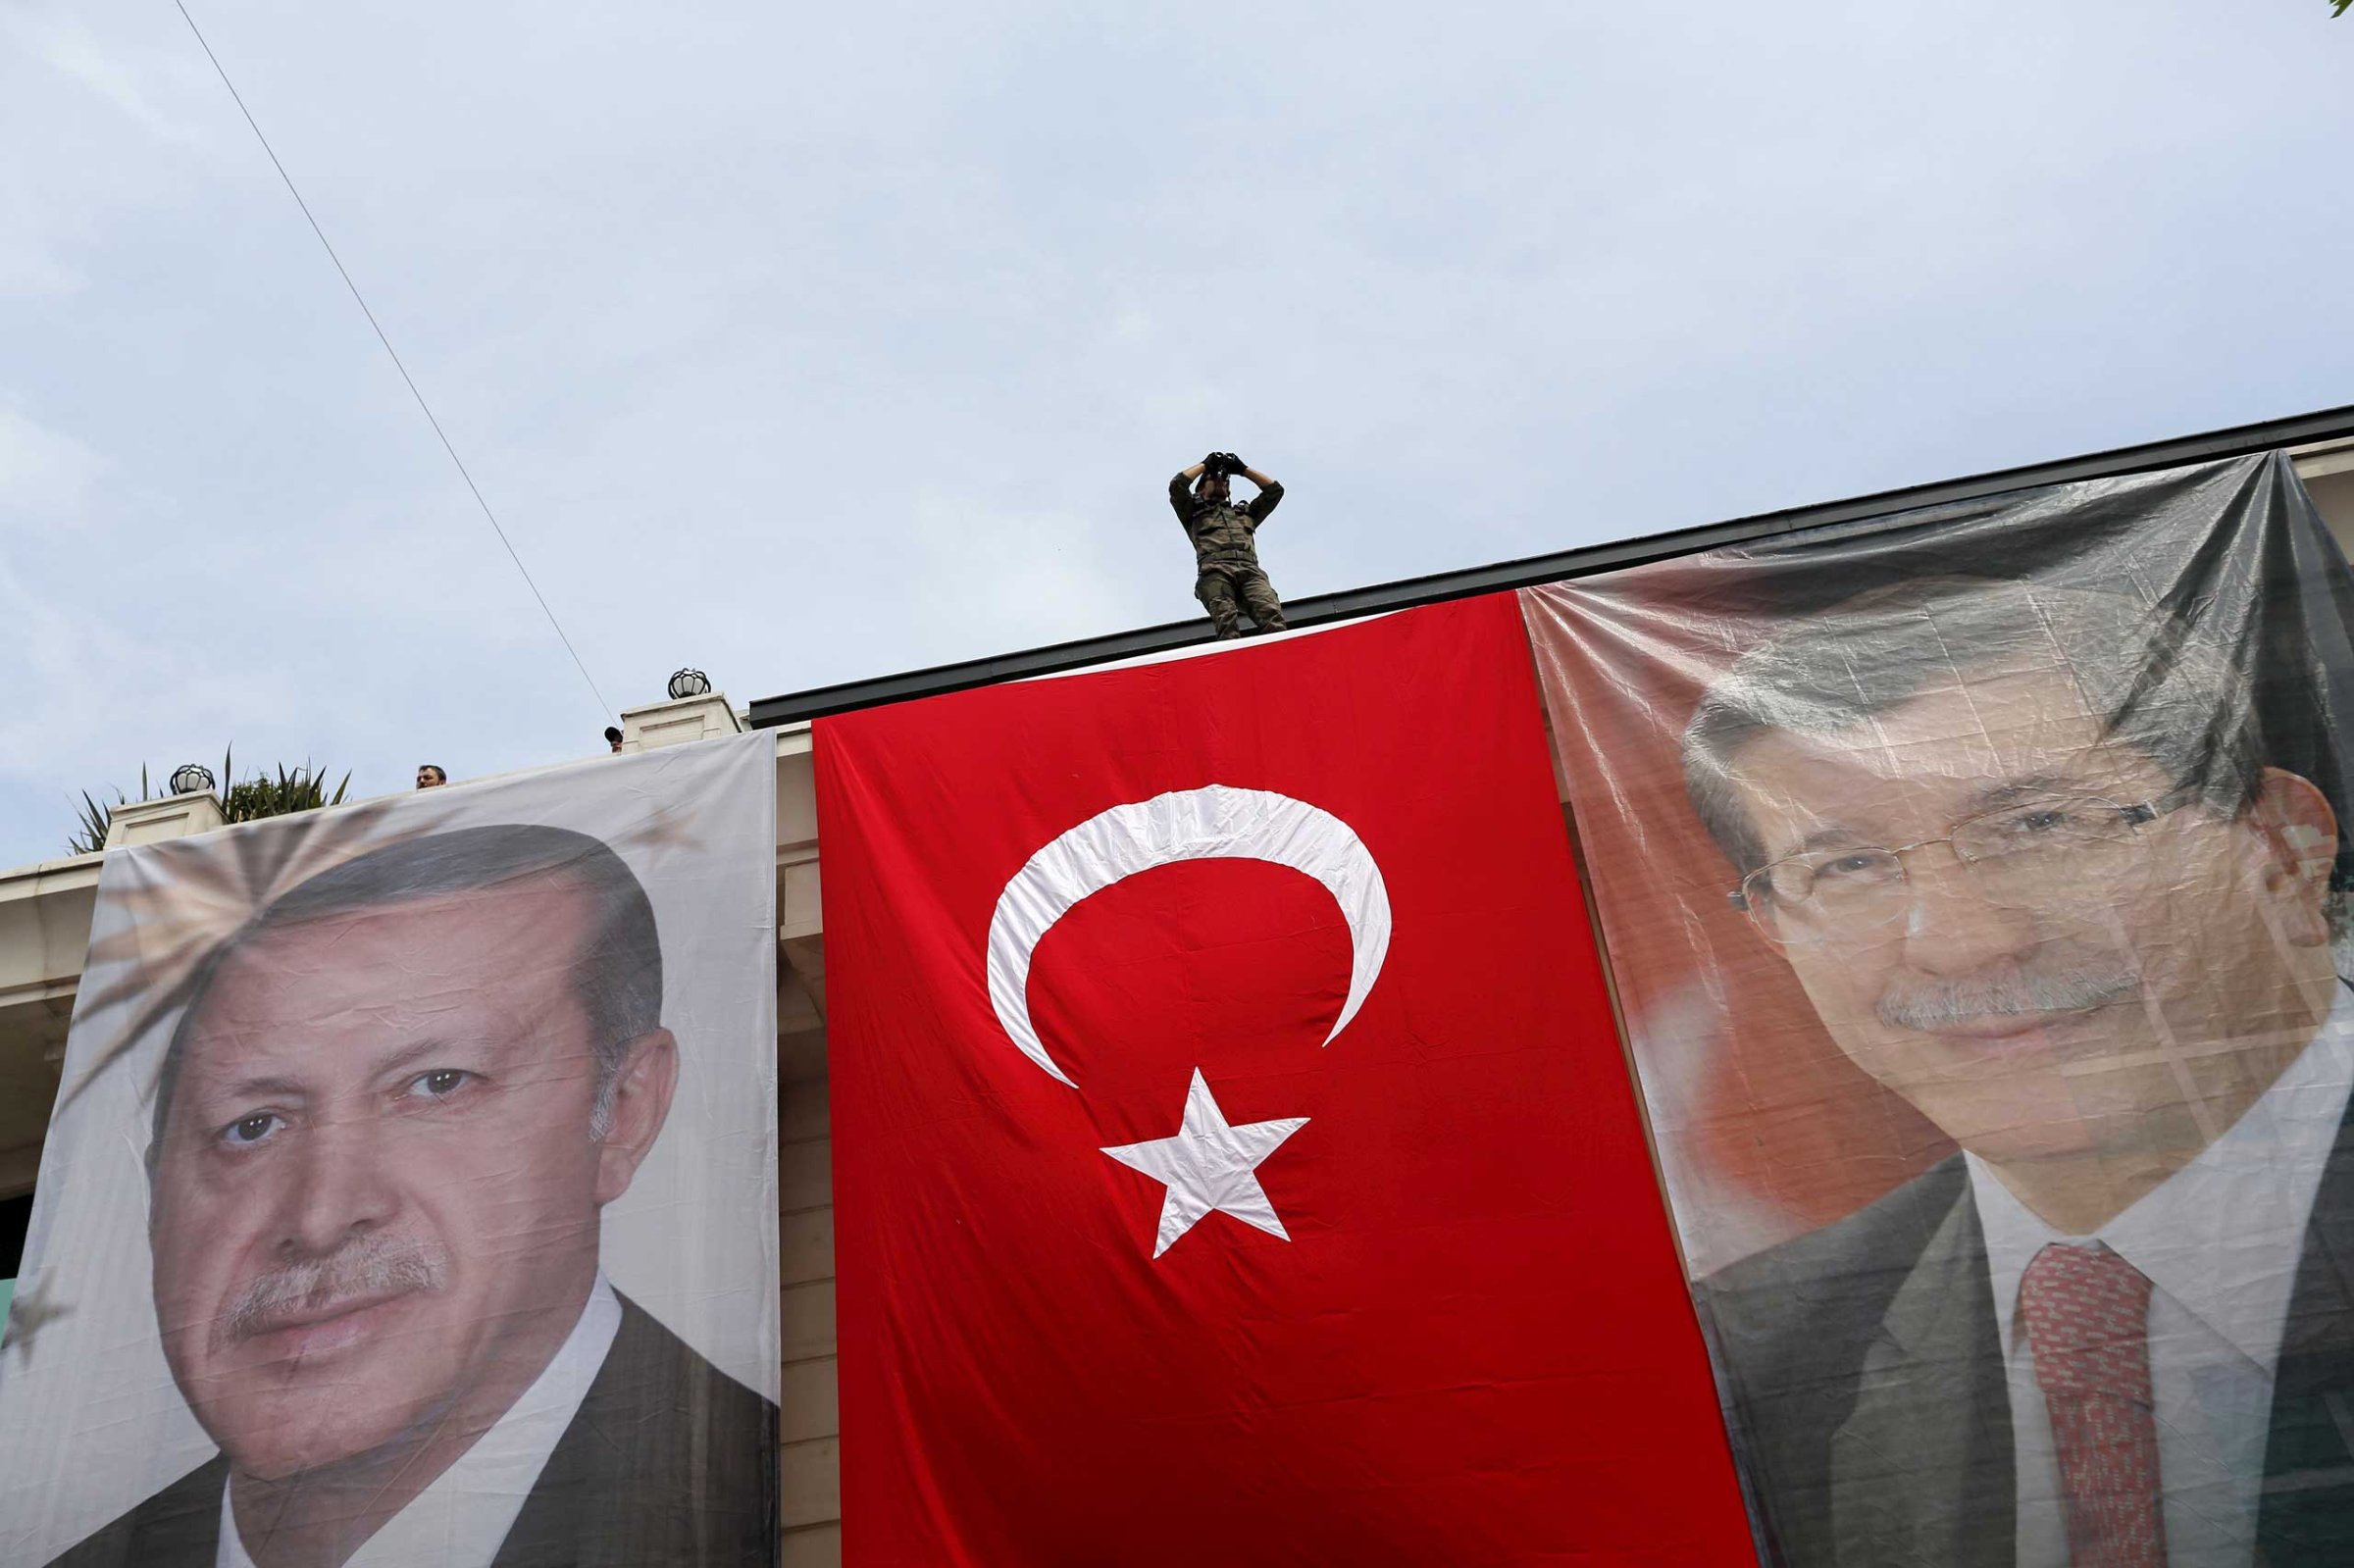 A special forces police officer takes security measures as he stands on top of a building where the portraits of Turkey's President Tayyip Erdogan, Prime Minister Ahmet Davutoglu and a Turkish flag are displayed in Istanbul on June 3, 2015.